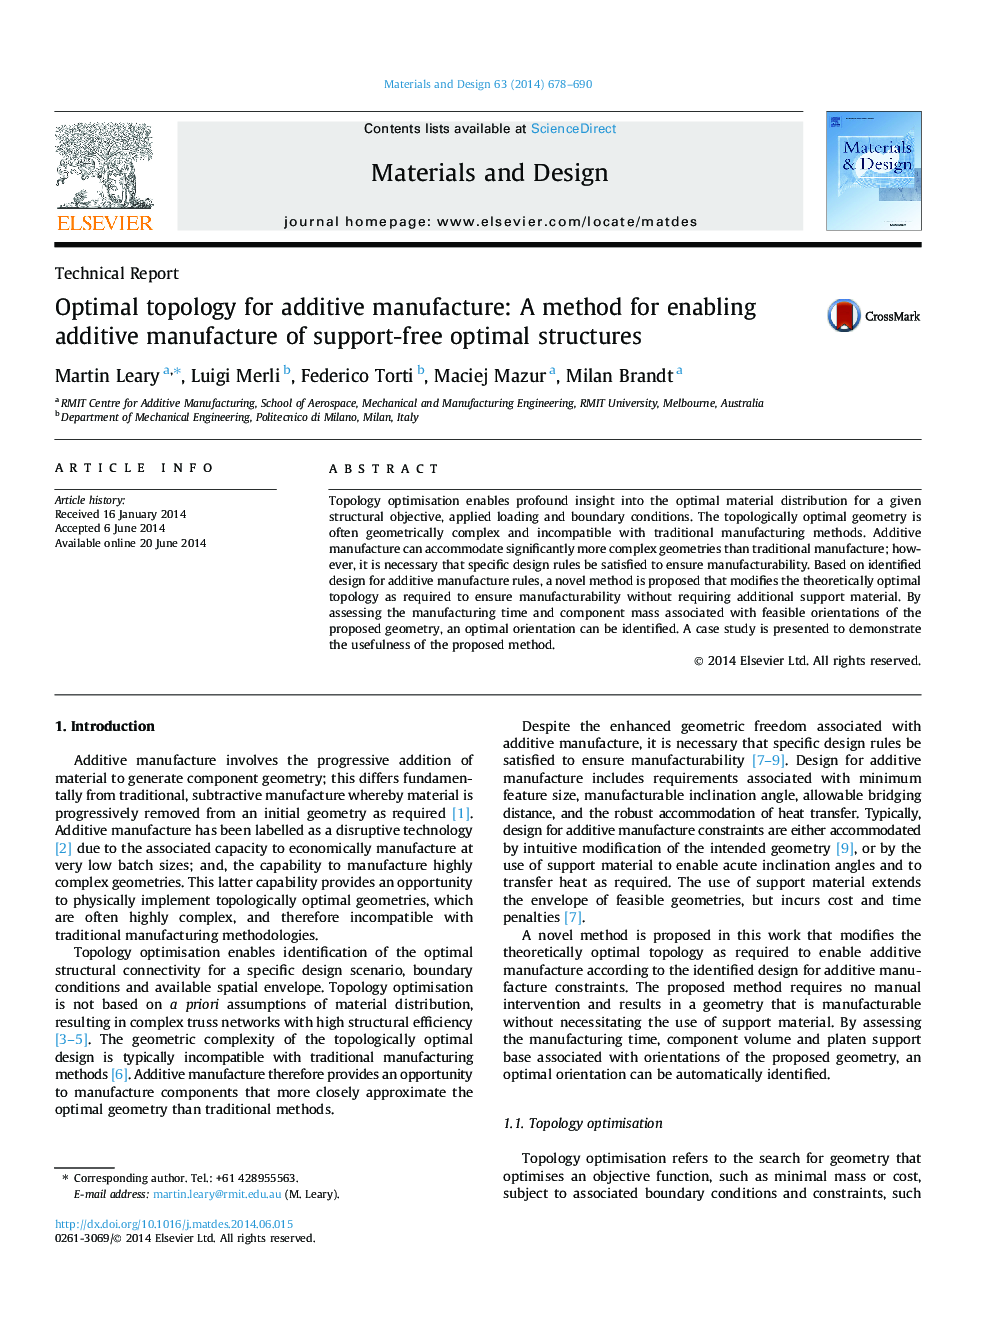 Optimal topology for additive manufacture: A method for enabling additive manufacture of support-free optimal structures